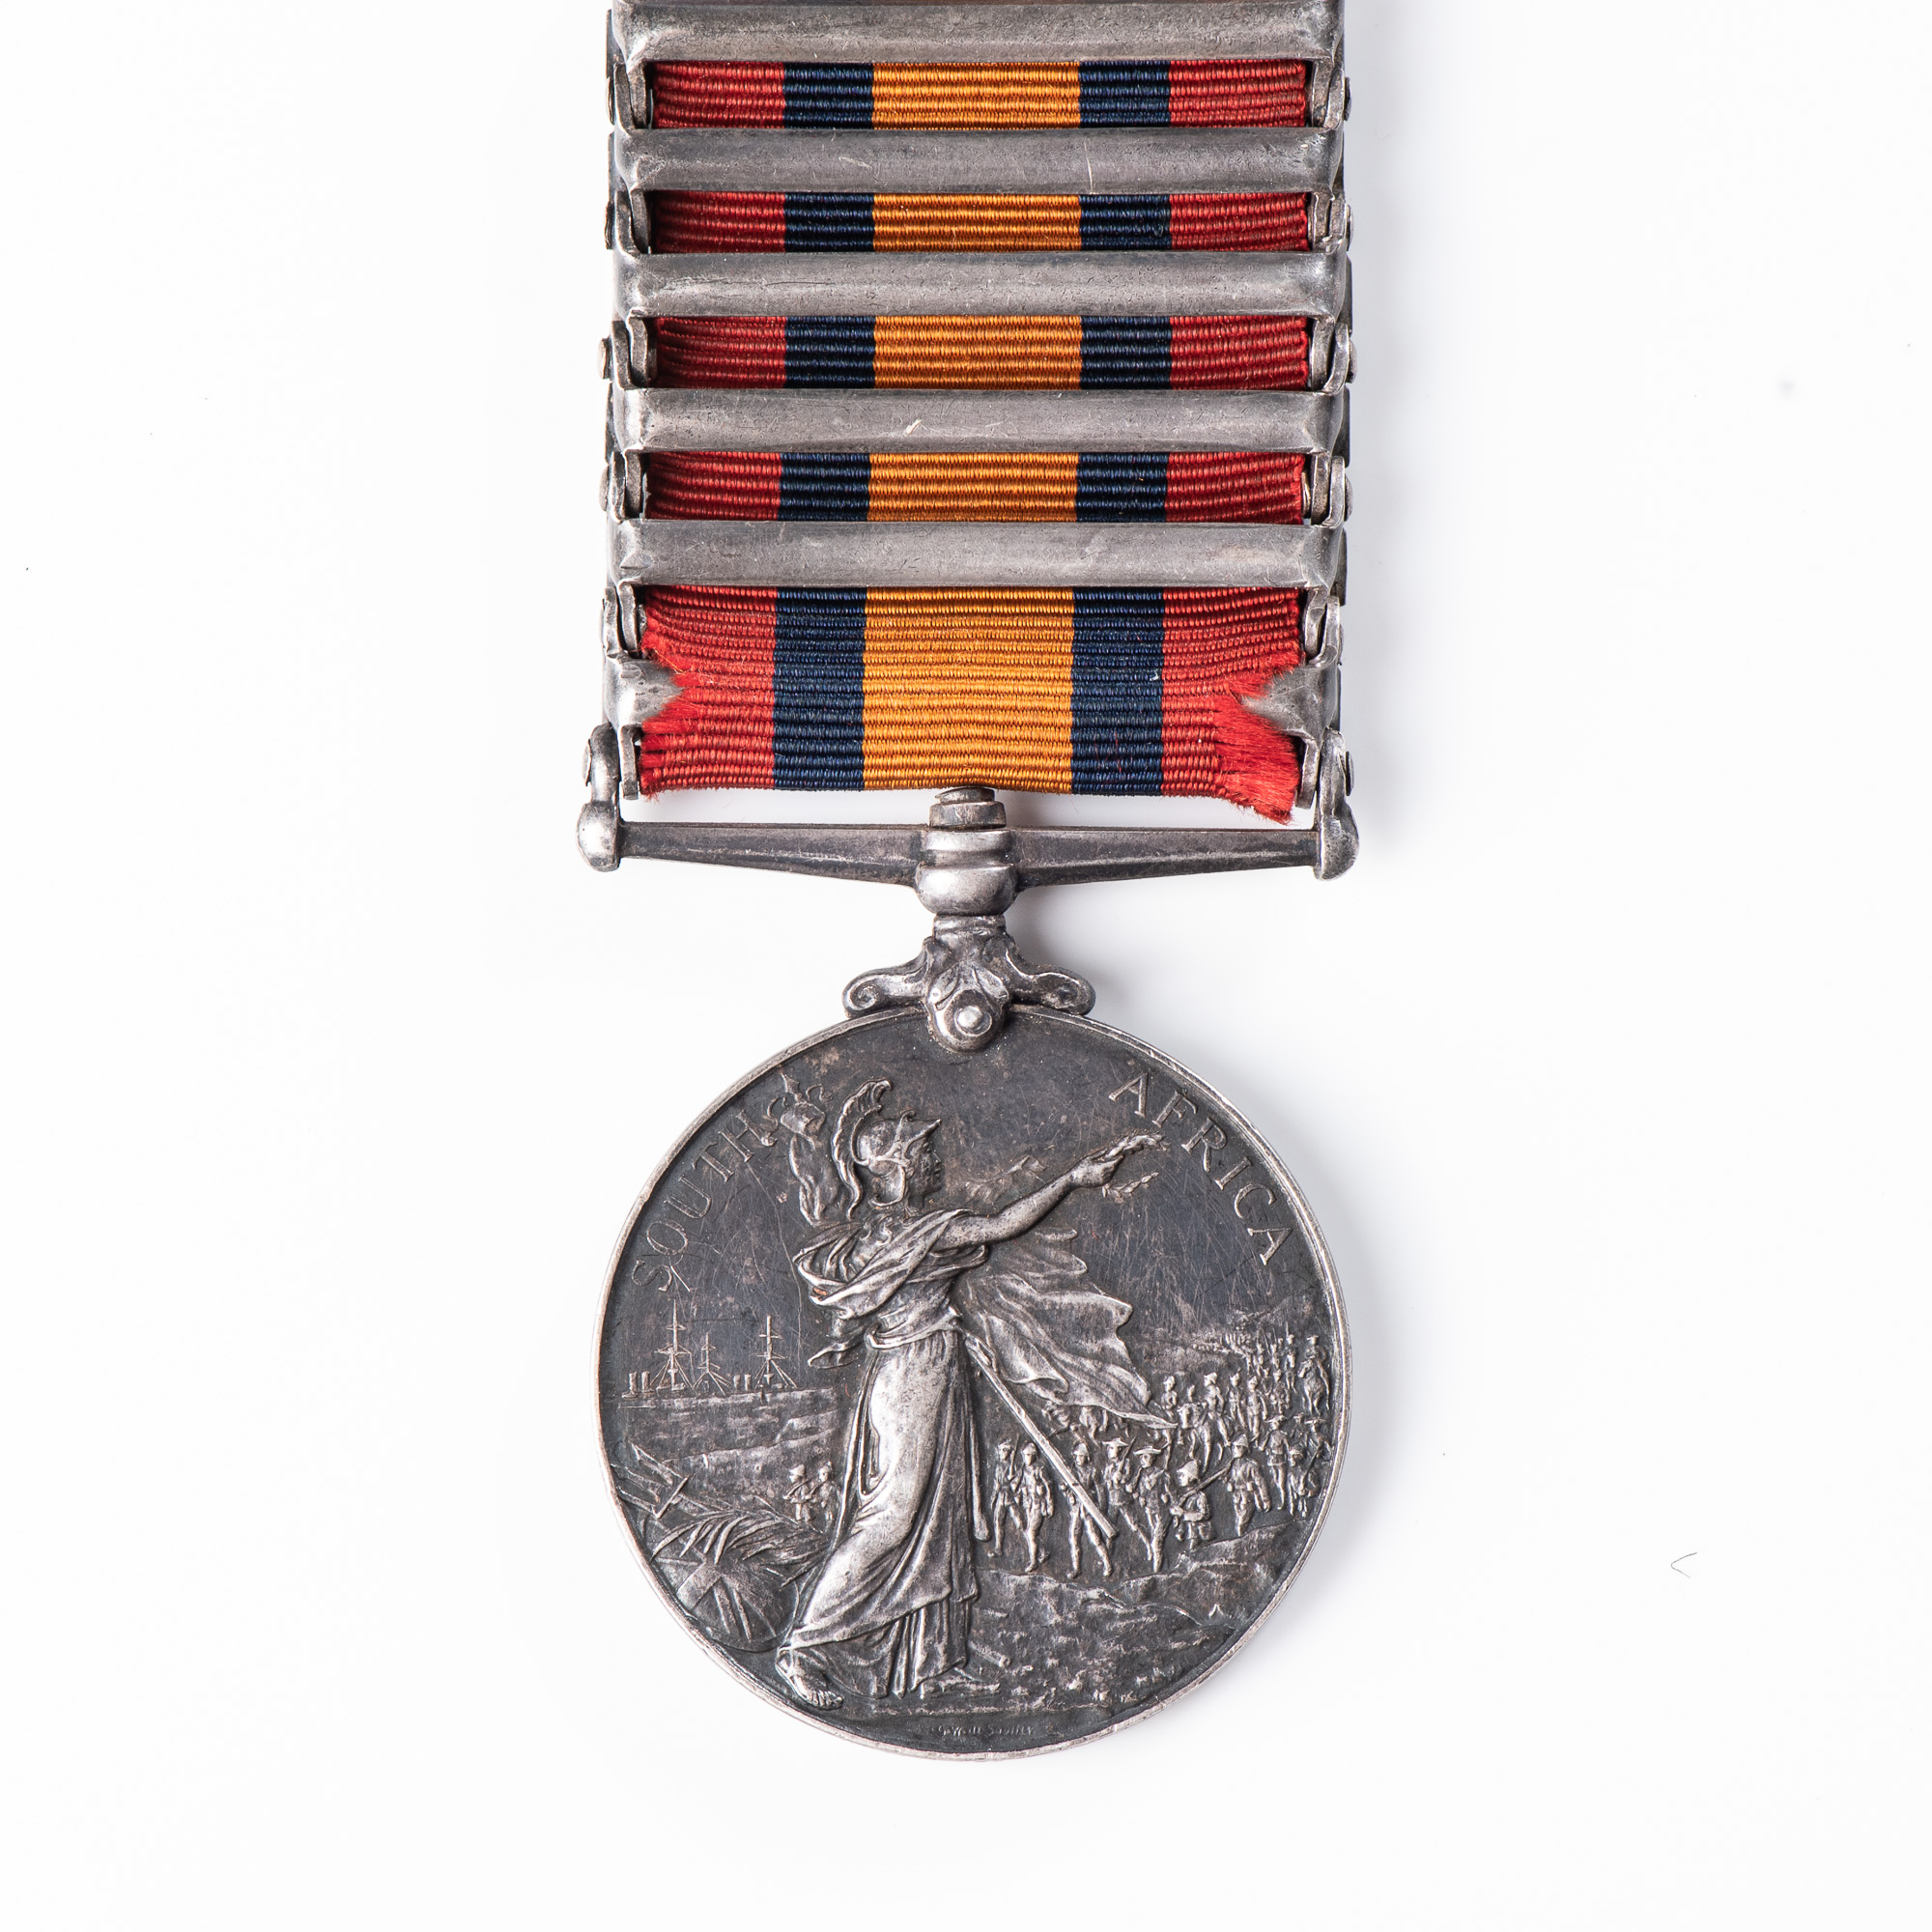 BOER WAR BATTLE OF COLENSO, SPION KOP AND RELIEF OF LADYSMITH QUEEN'S SOUTH AFRICA MEDAL - Image 3 of 3